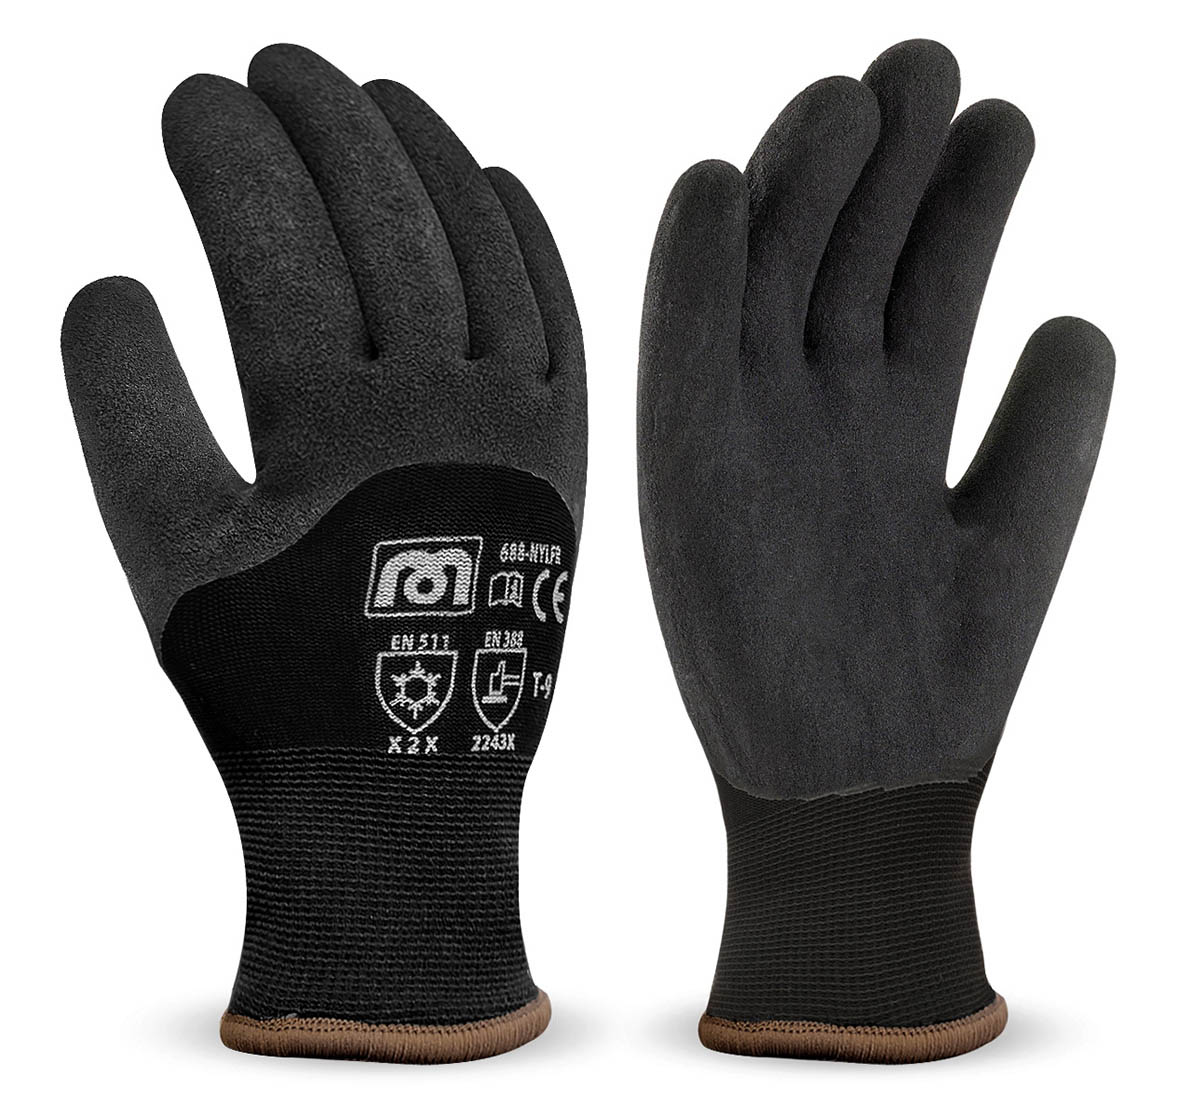 688-NYLF Work Gloves Insulated Black nylon glove with covering of black coloured latex.